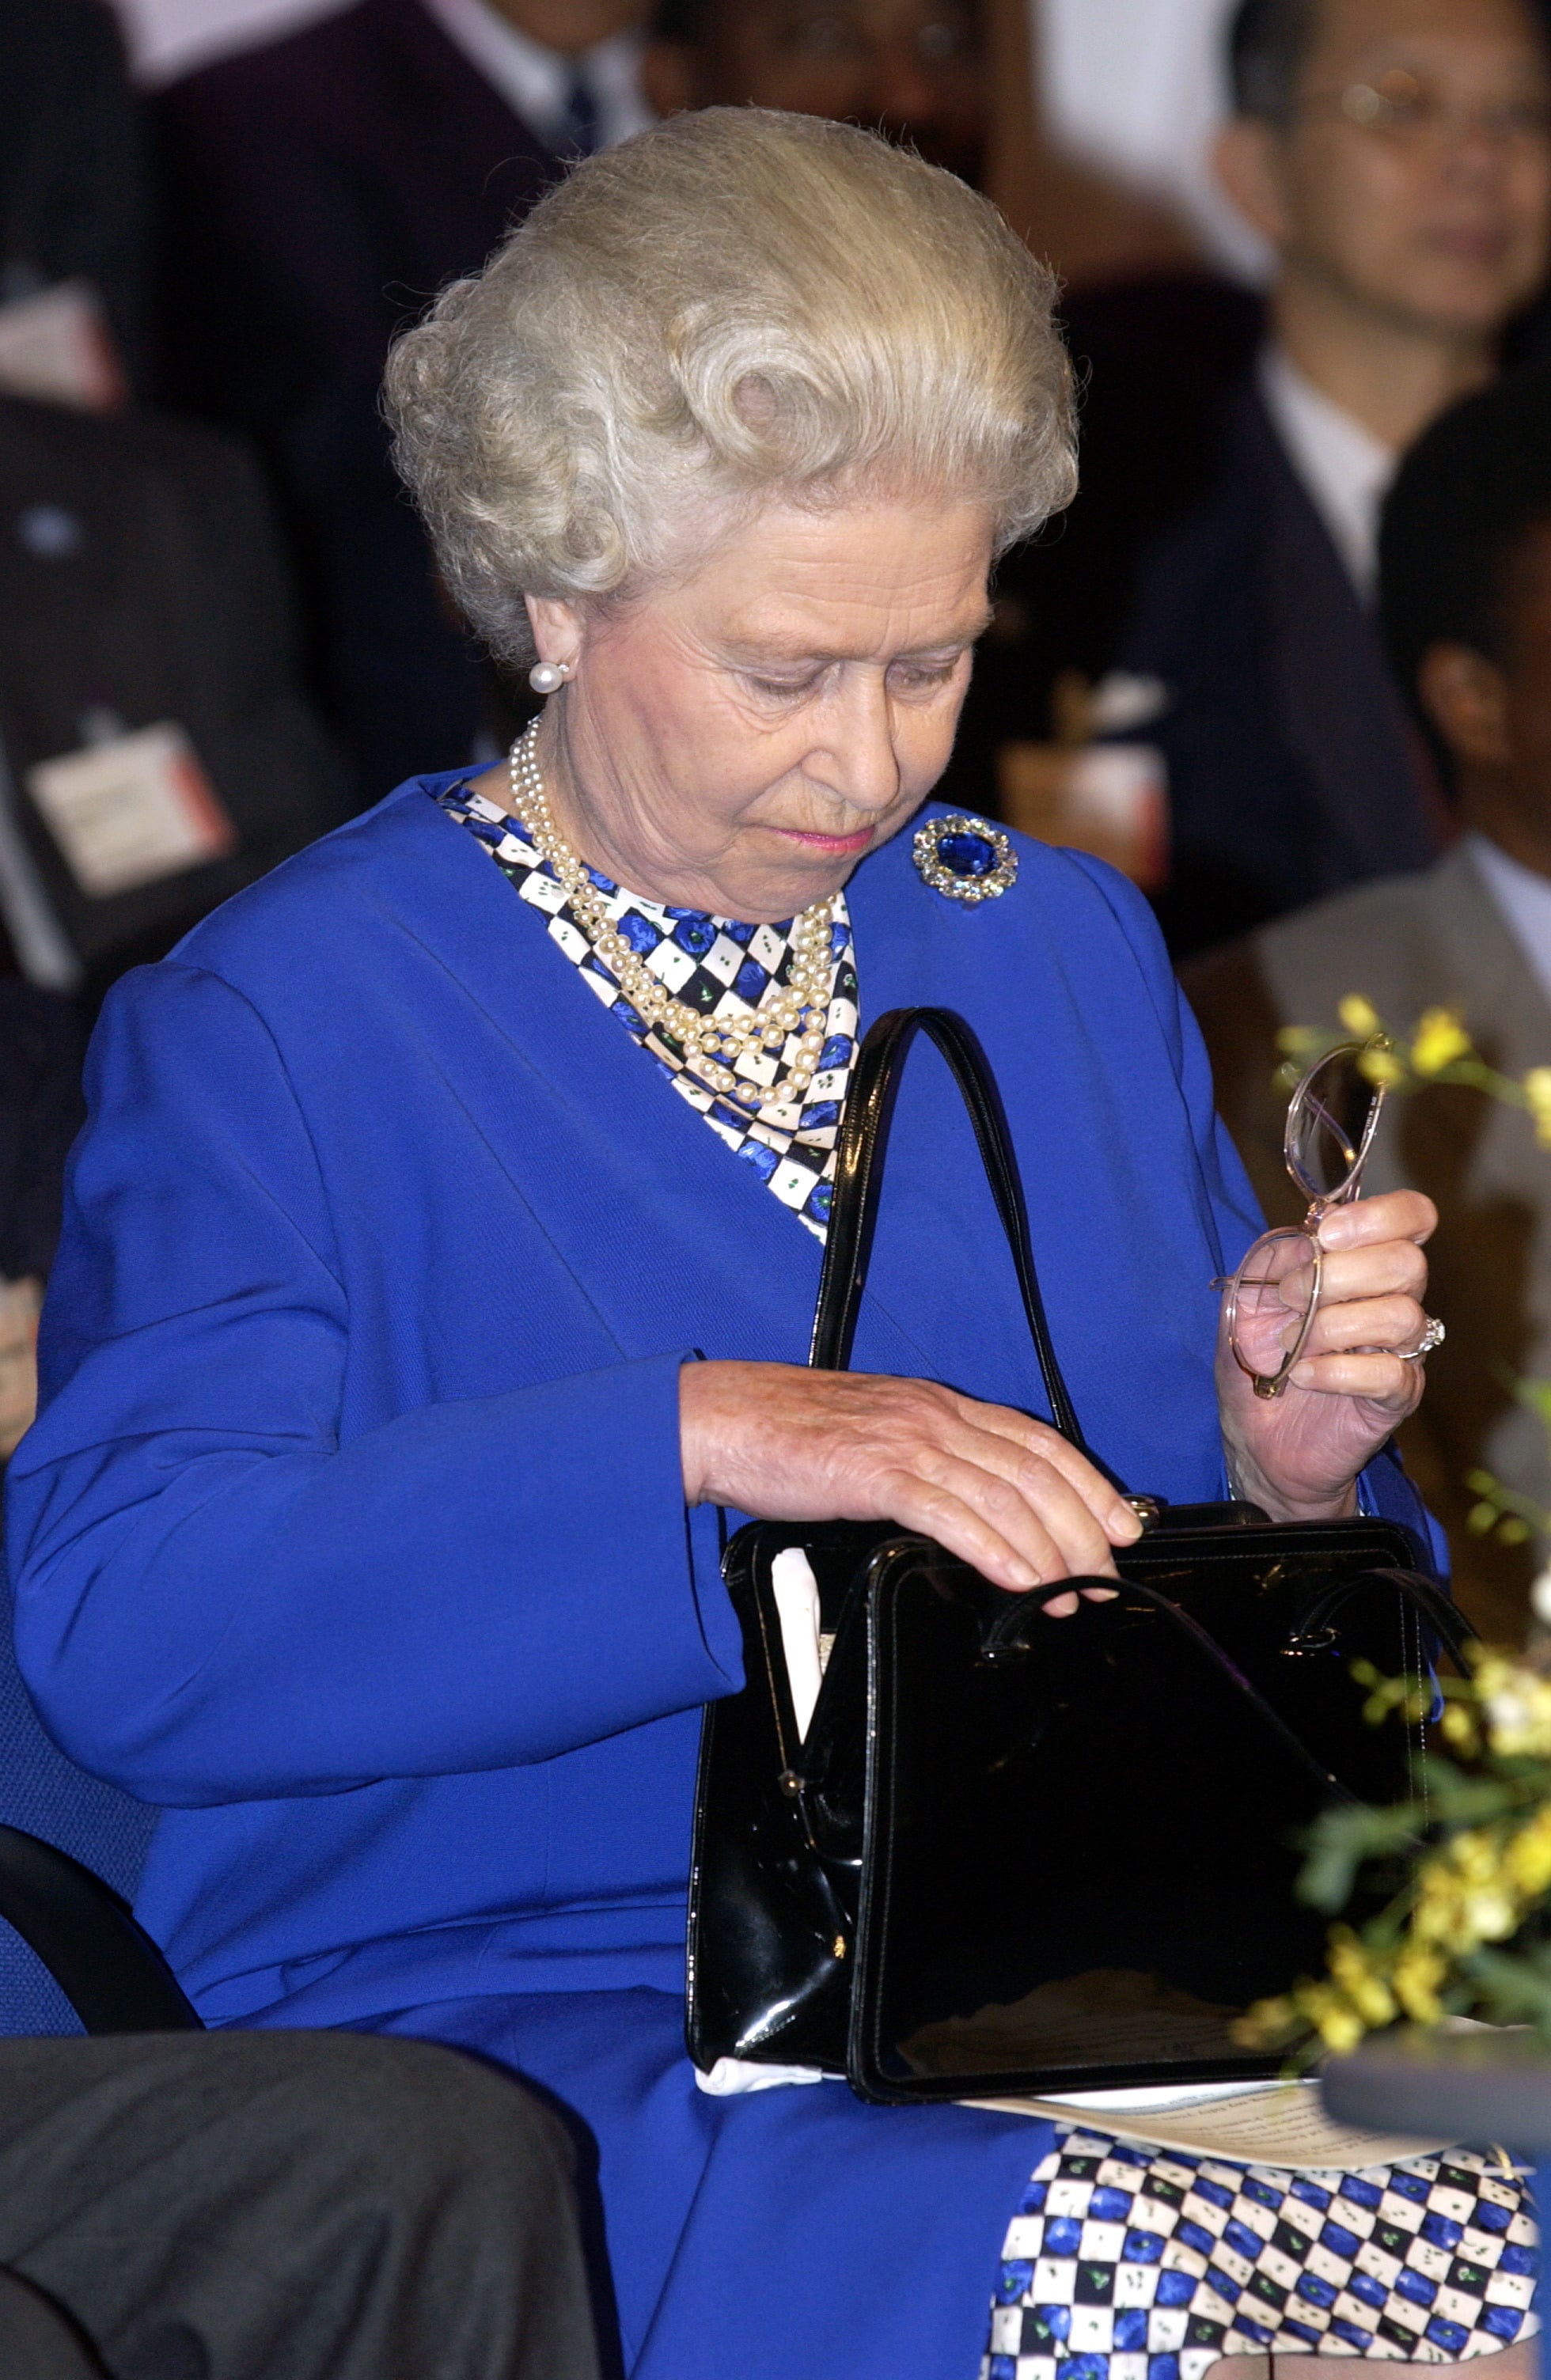 Why Does the Queen Always Carry a Purse?